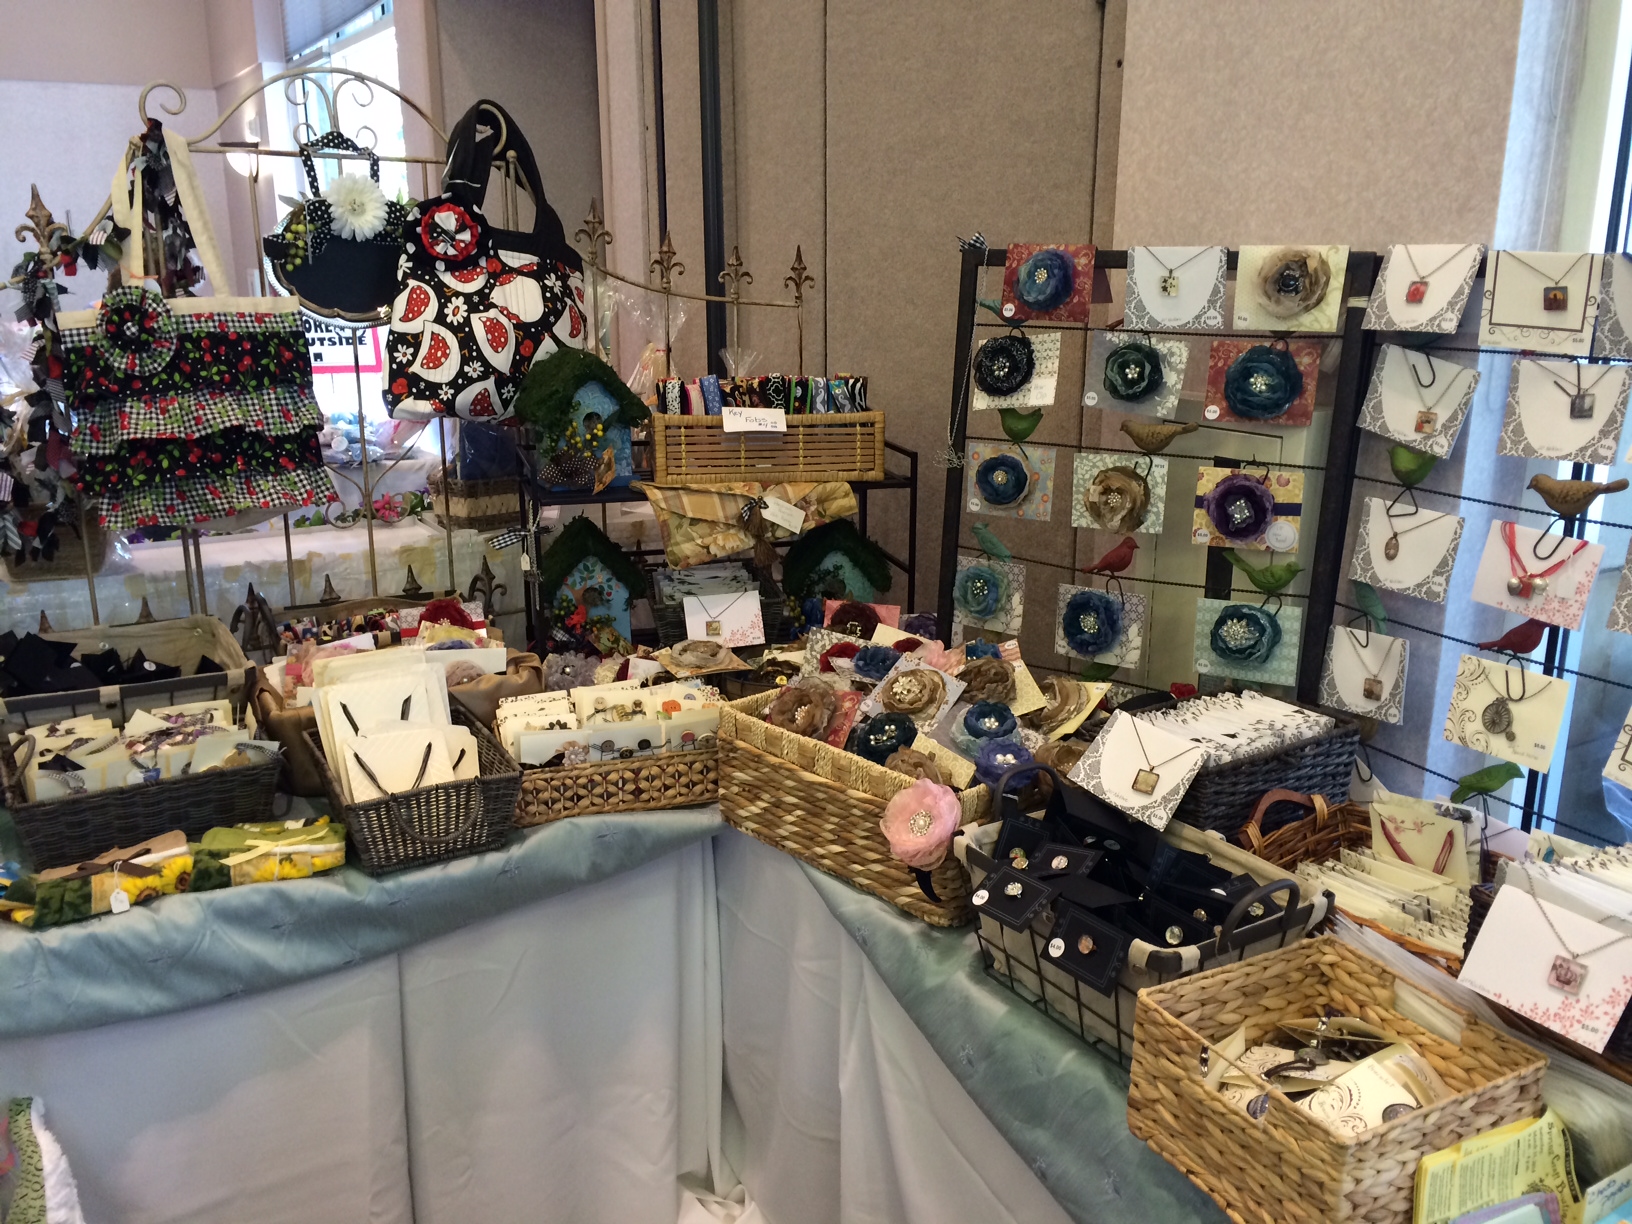 See us at the Yorba Linda Women's Club this weekend Jest For Fun Crafts